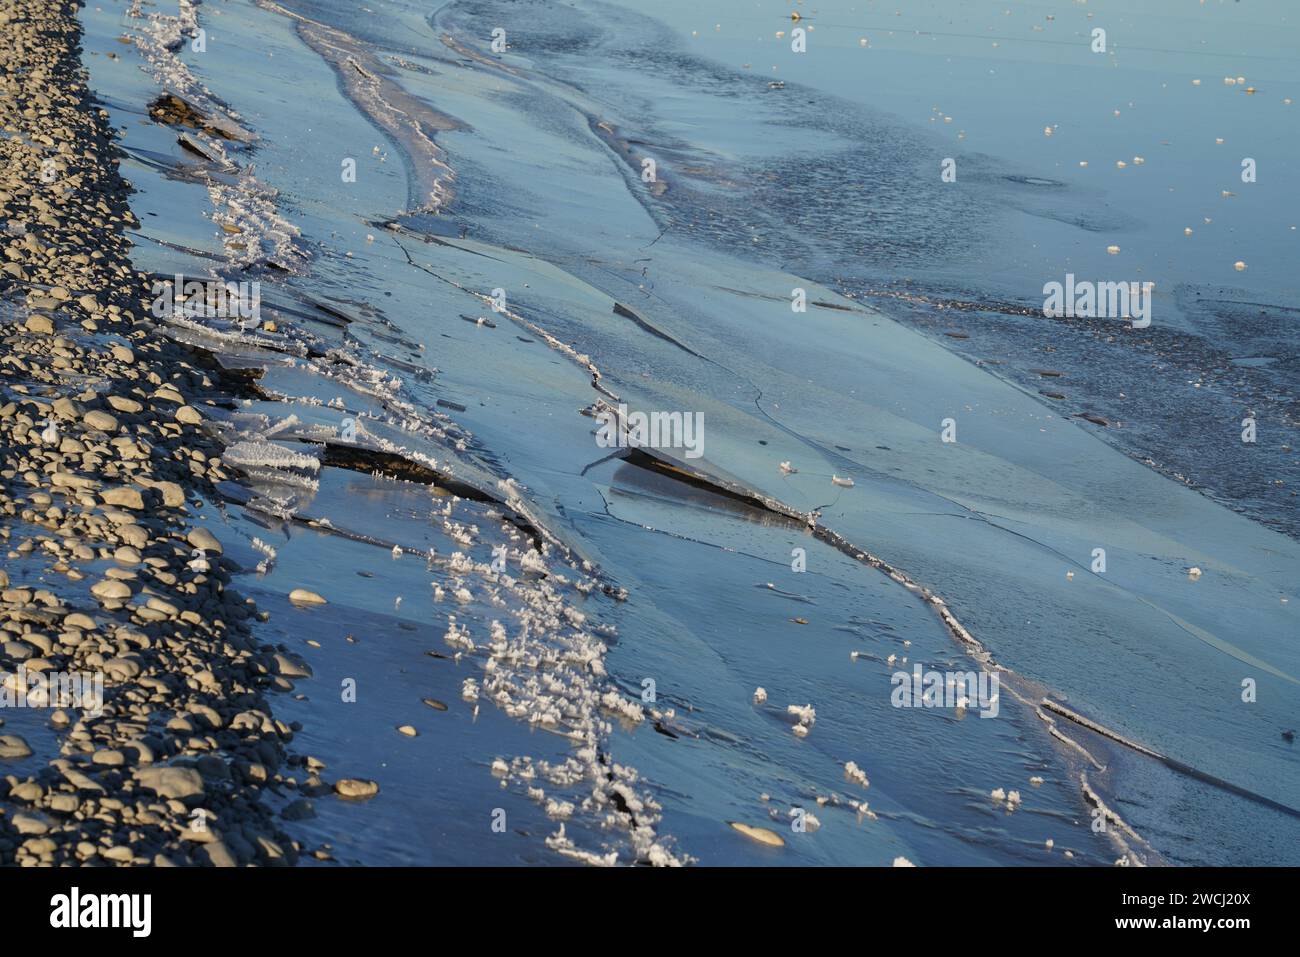 Winter landscape at an icy lake. Stock Photo